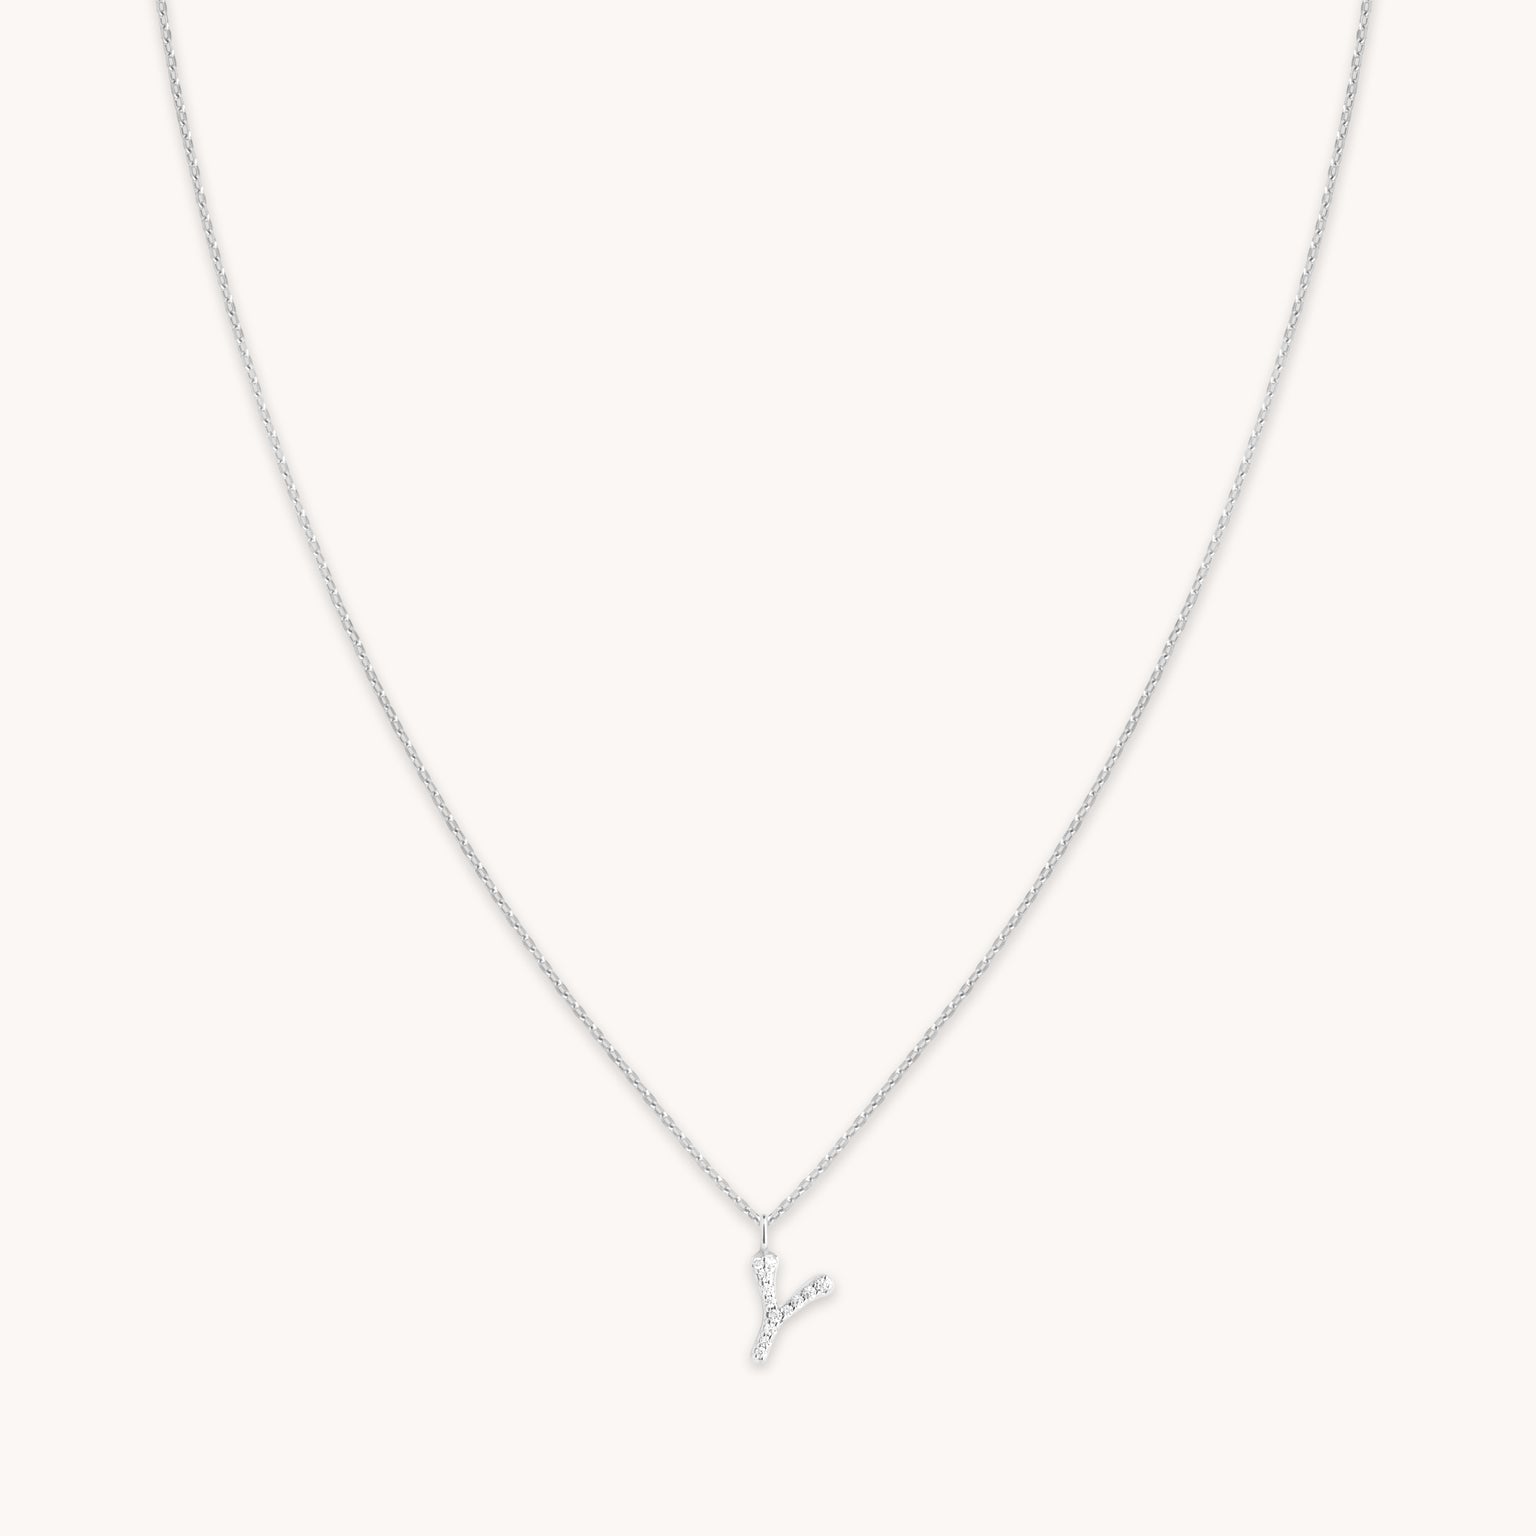 Y Initial Pavé Pendant Necklace in Silver